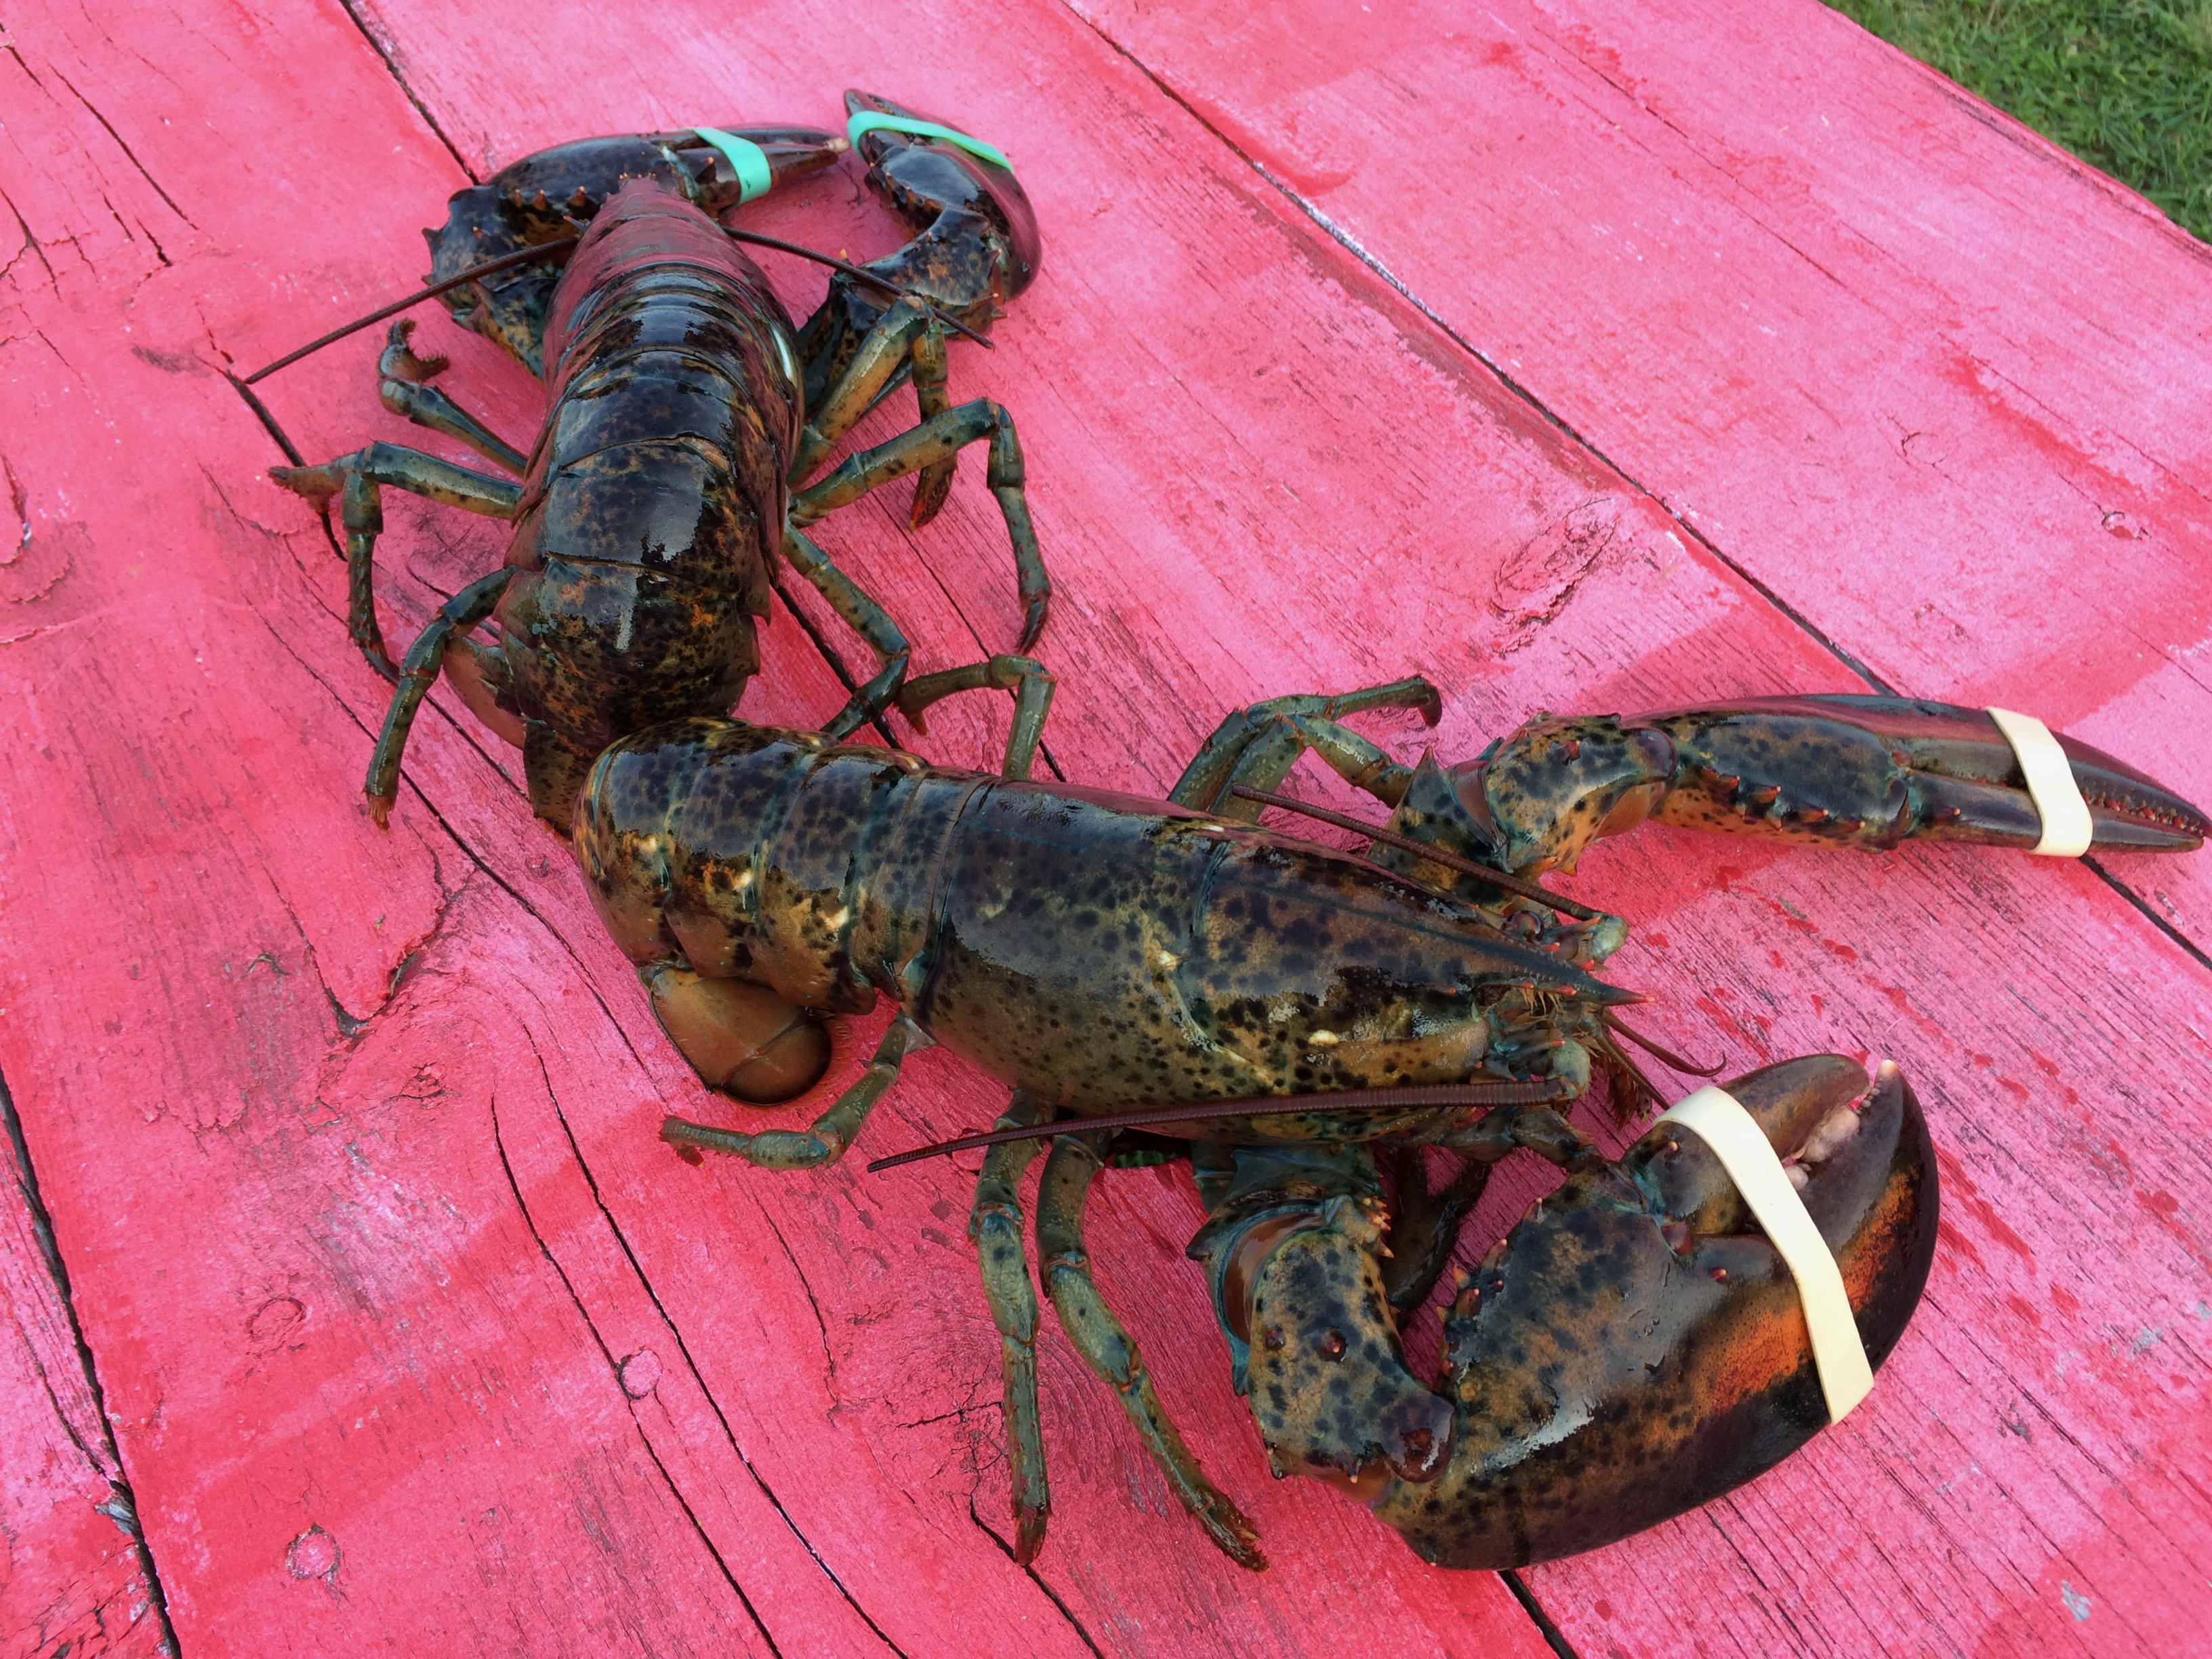 Live lobsters on the picnic table